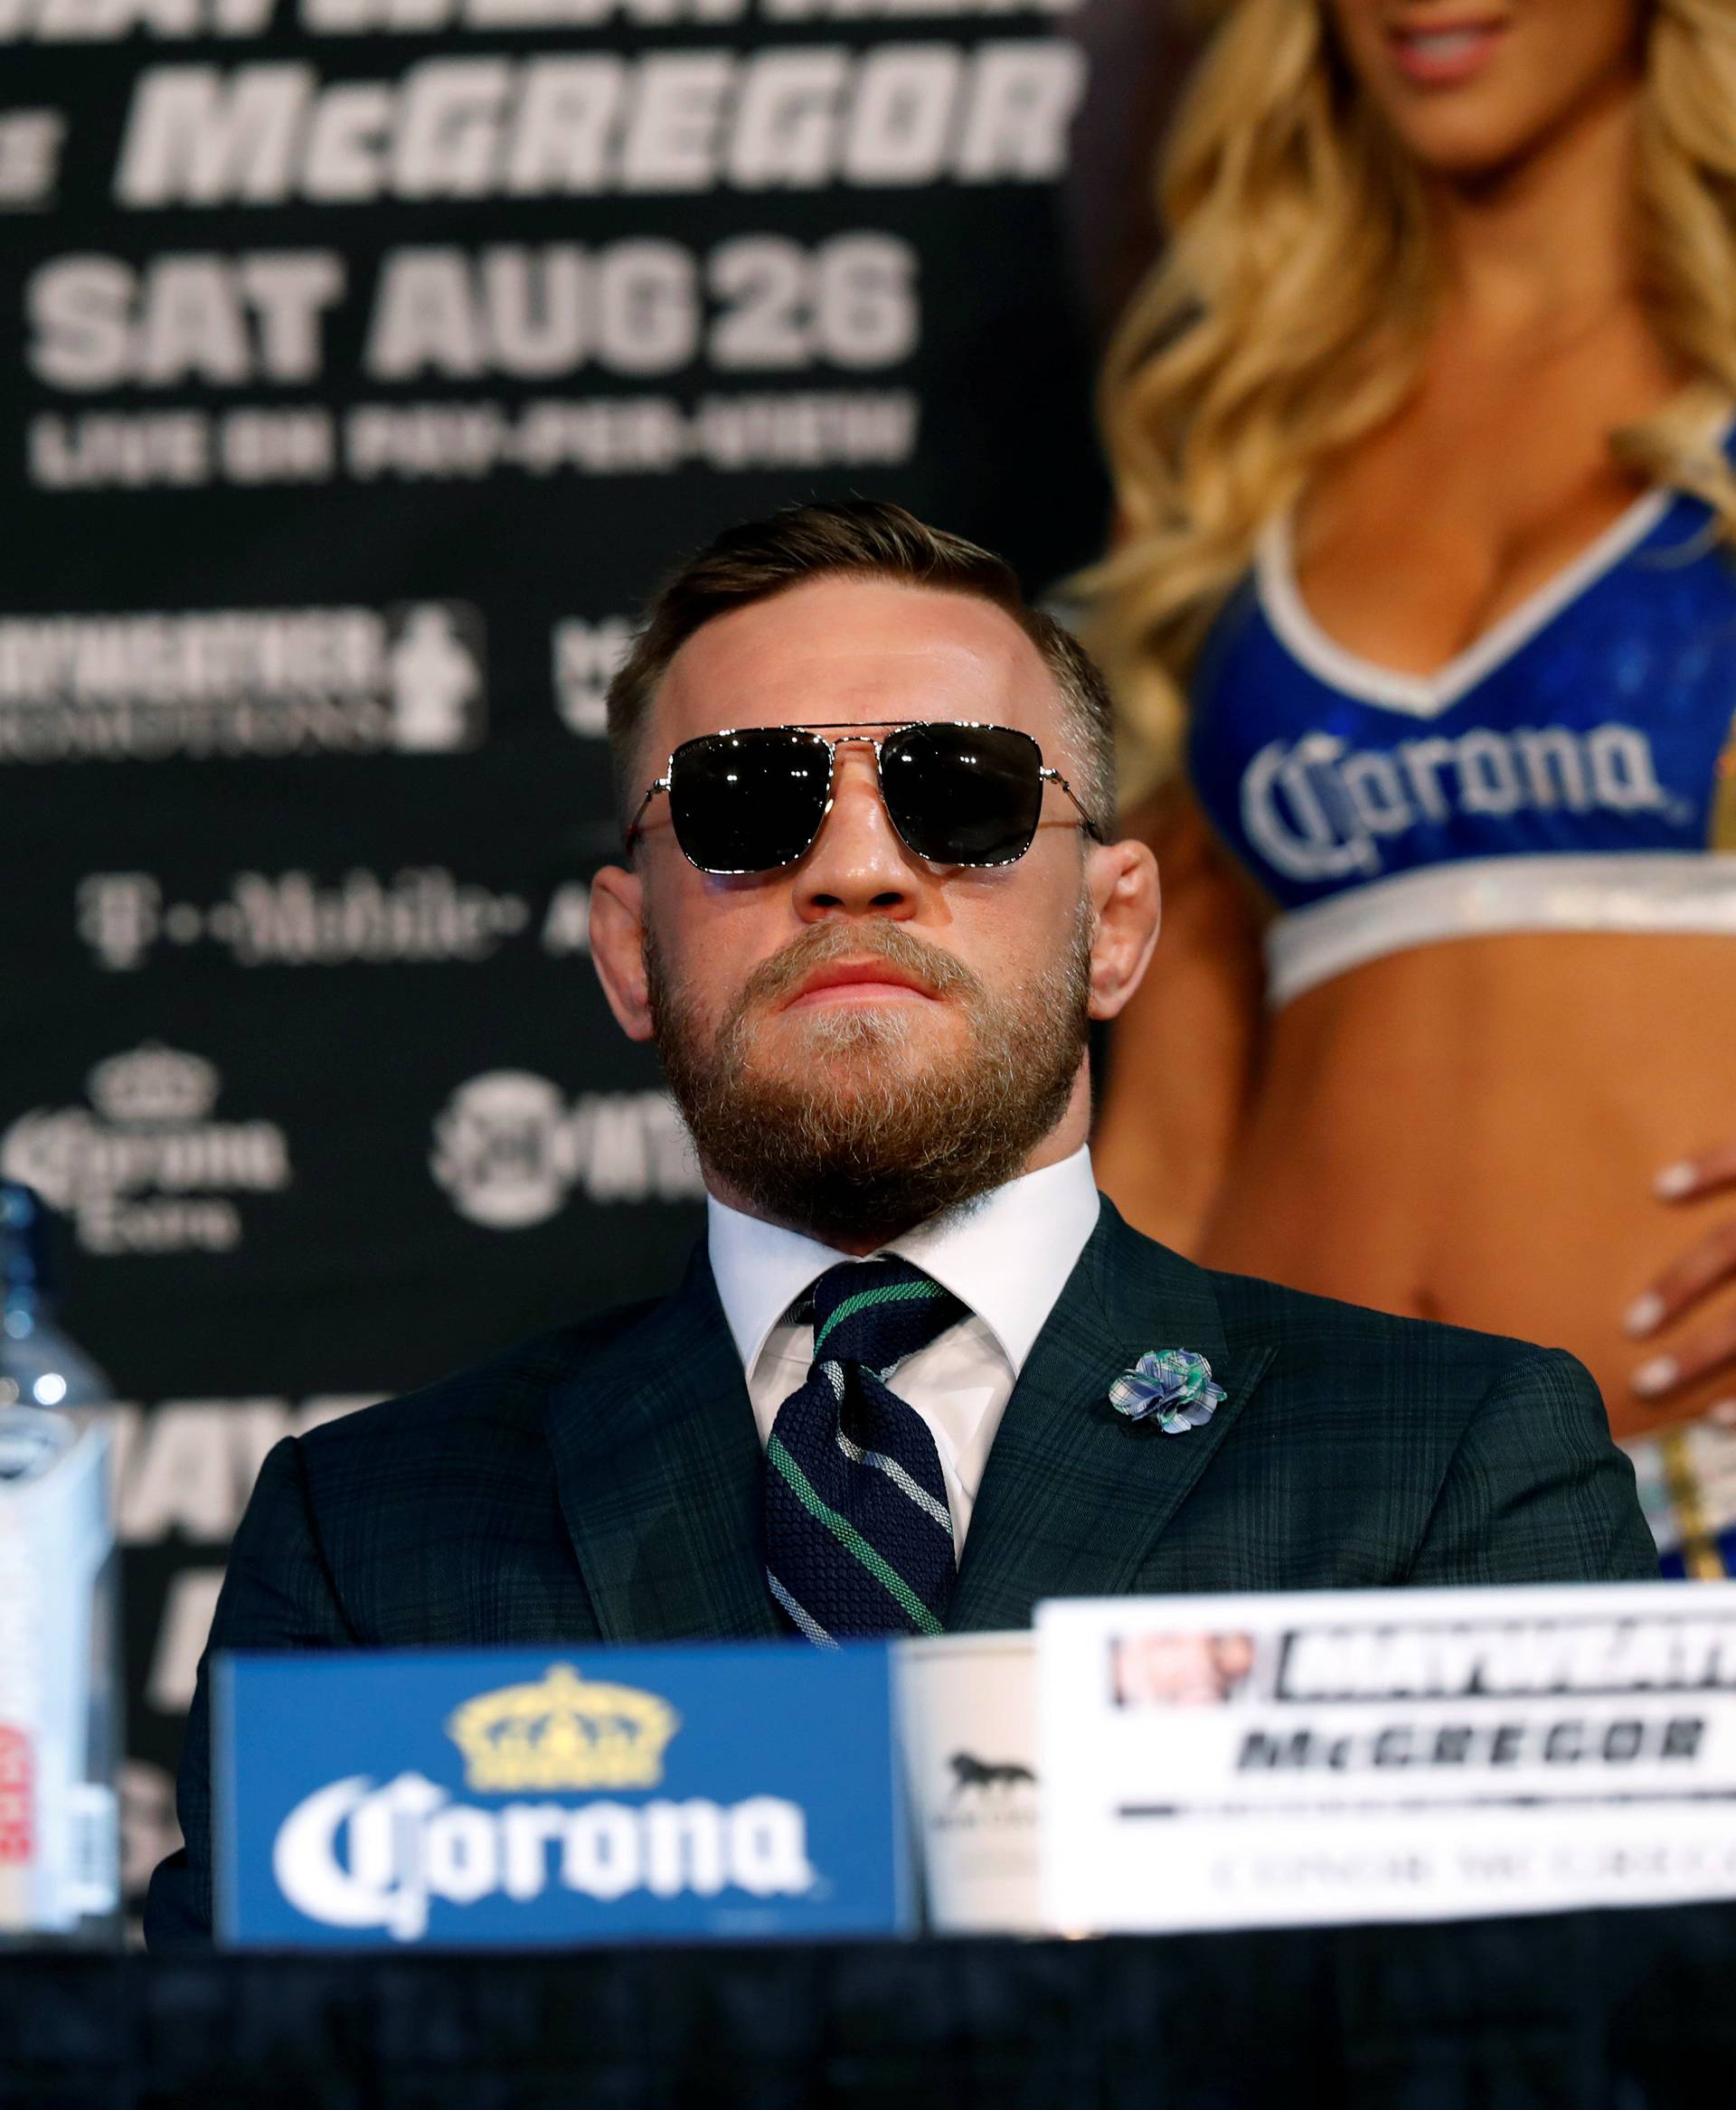 Conor McGregor of Ireland listens to Floyd Mayweather Jr. of the U.S. during a news conference in Las Vegas